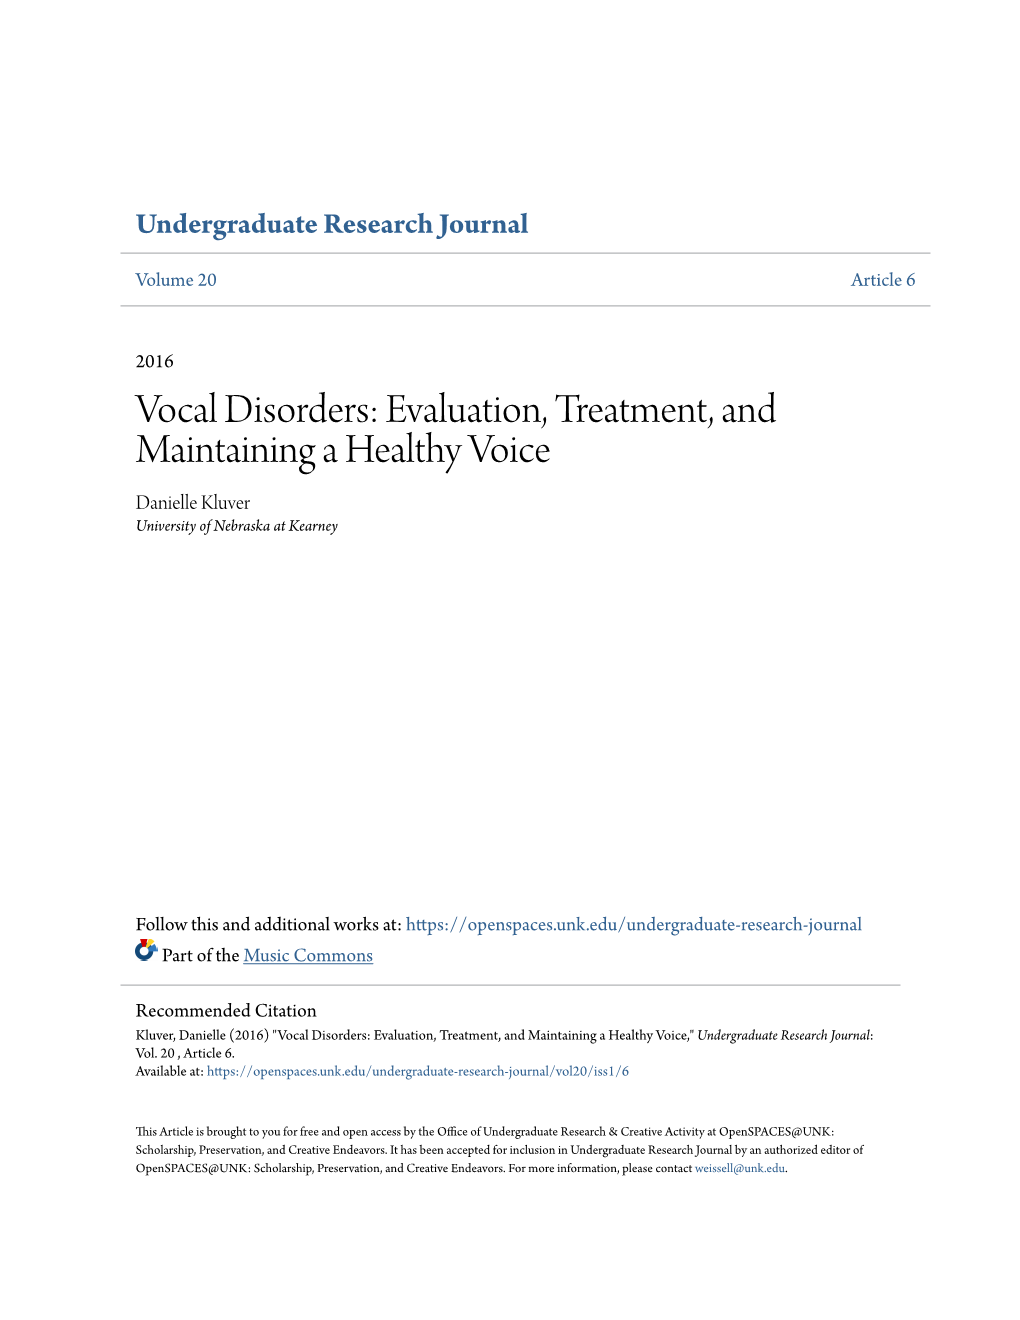 Vocal Disorders: Evaluation, Treatment, and Maintaining a Healthy Voice Danielle Kluver University of Nebraska at Kearney